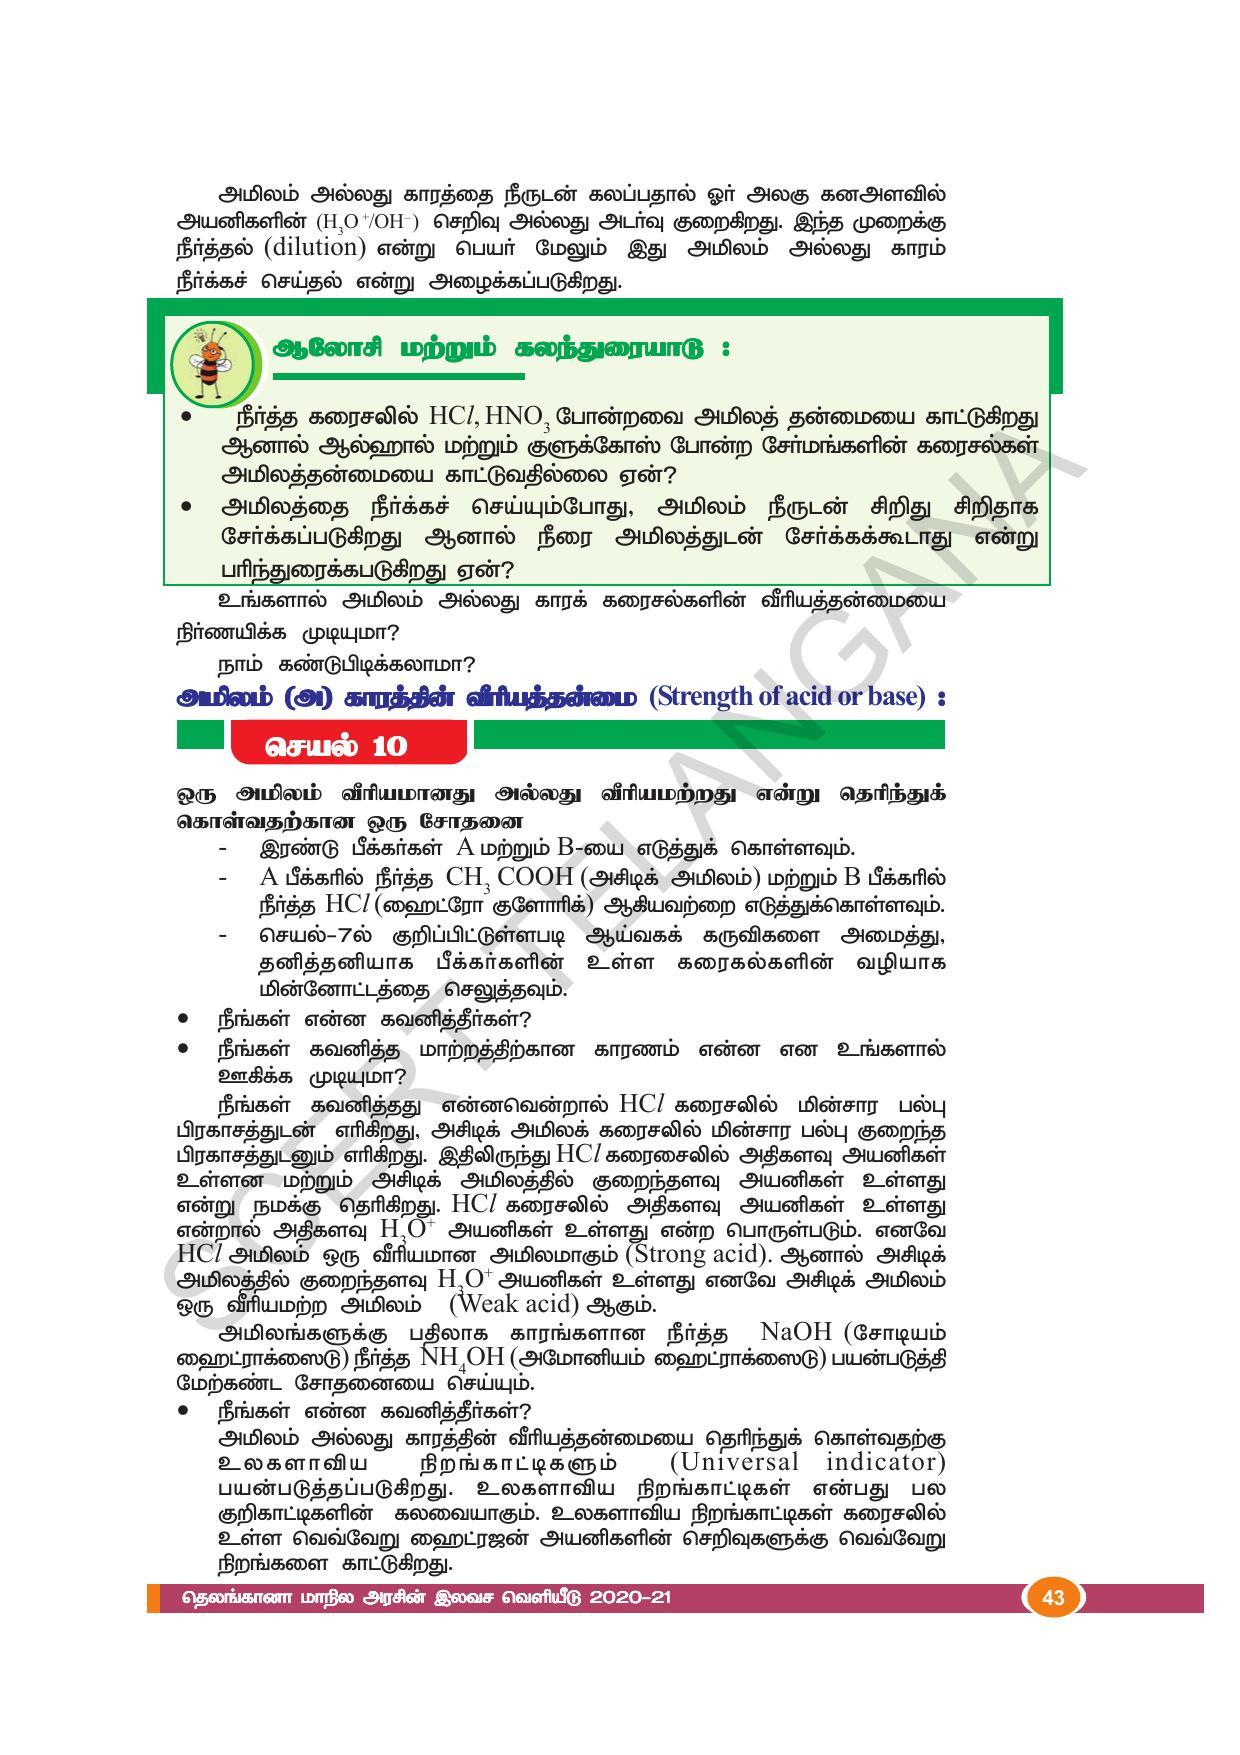 TS SCERT Class 10 Physical Science(Tamil Medium) Text Book - Page 55